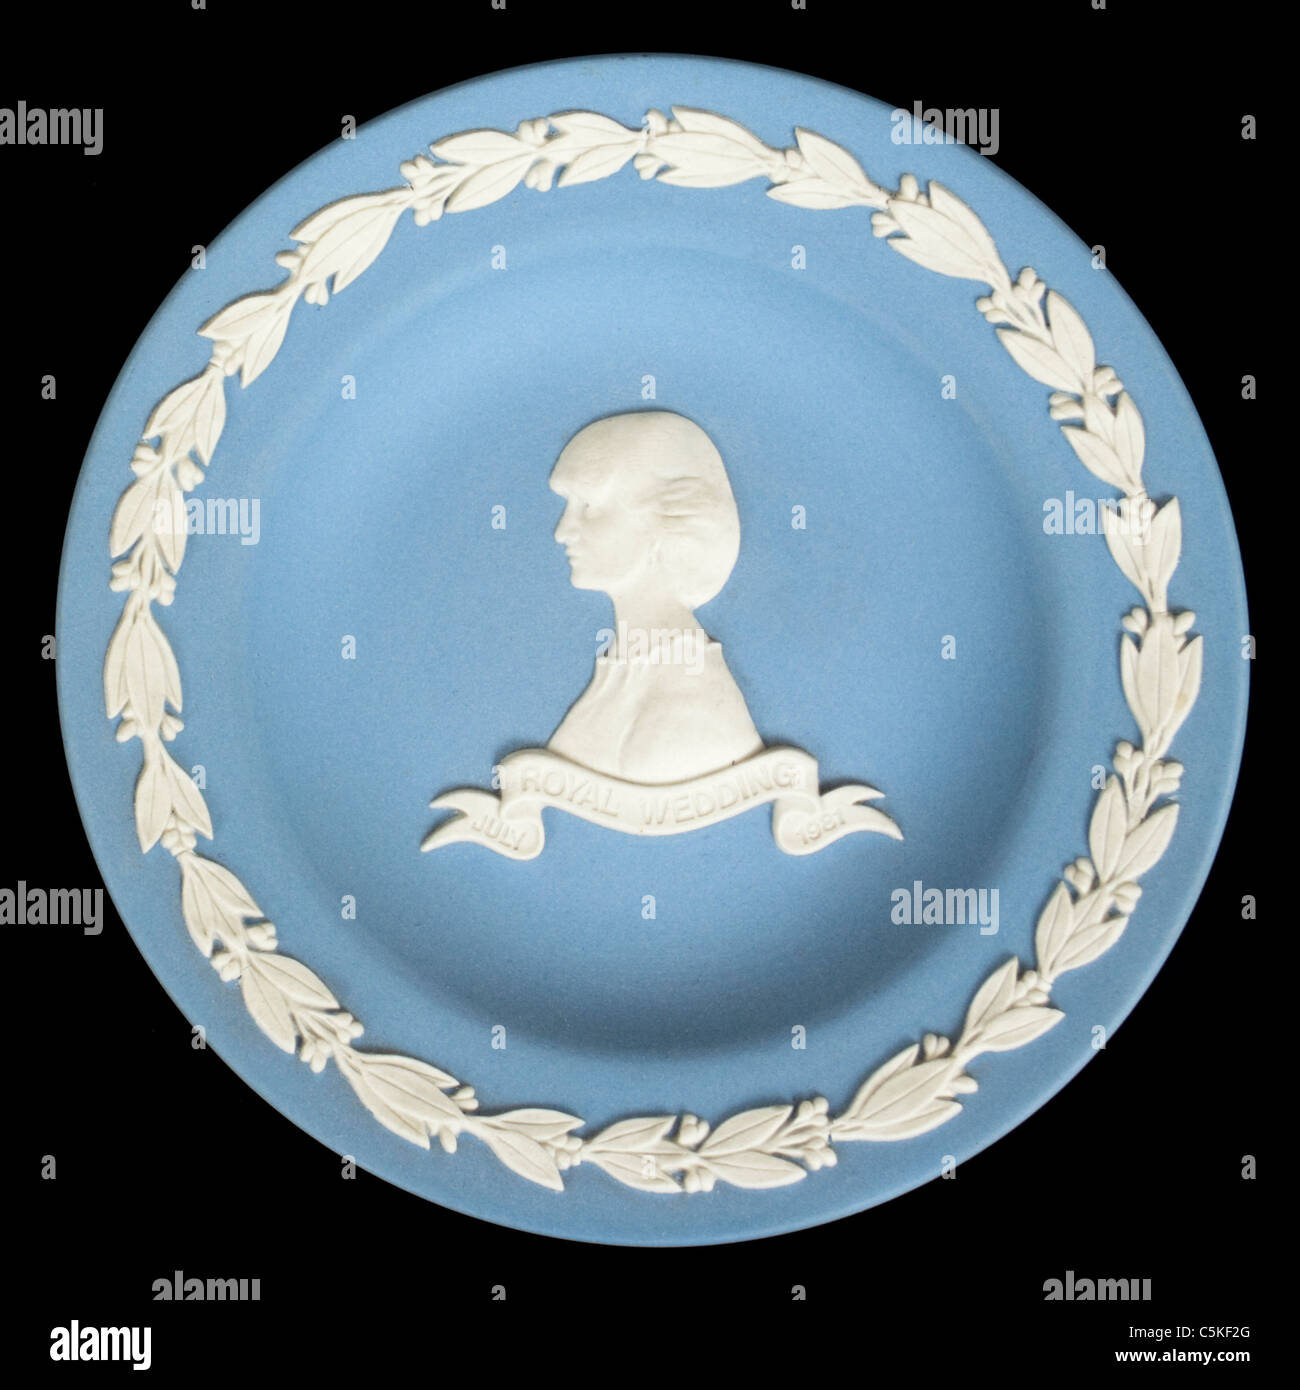 Wedgwood blue Jasperware plate commemorating the wedding of Prince Charles and Lady Diana Spencer (29th July 1981) Stock Photo